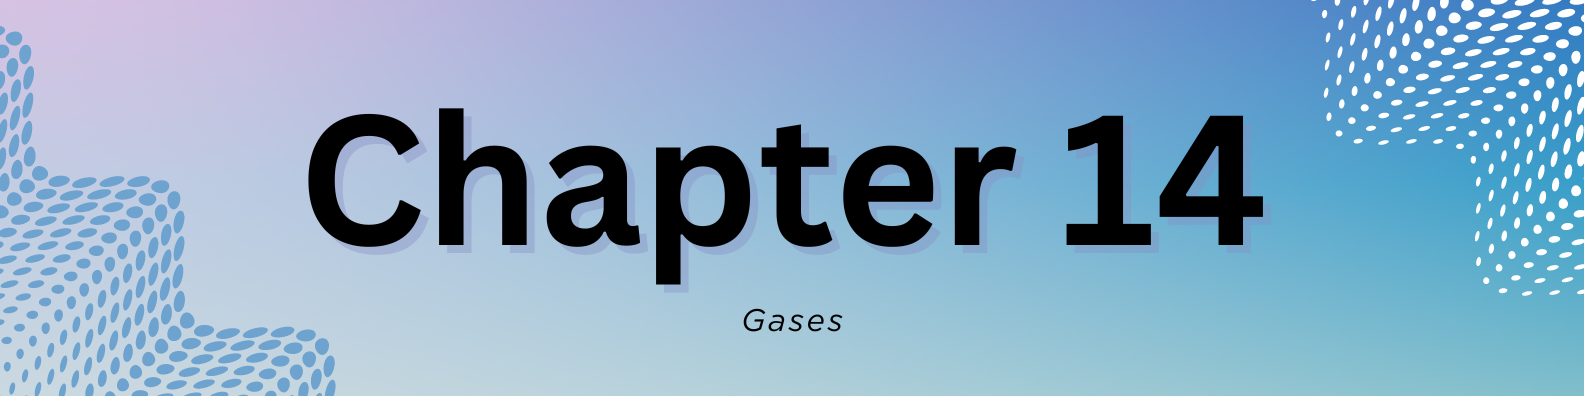 Chapter 14 - Gases and Gas Laws